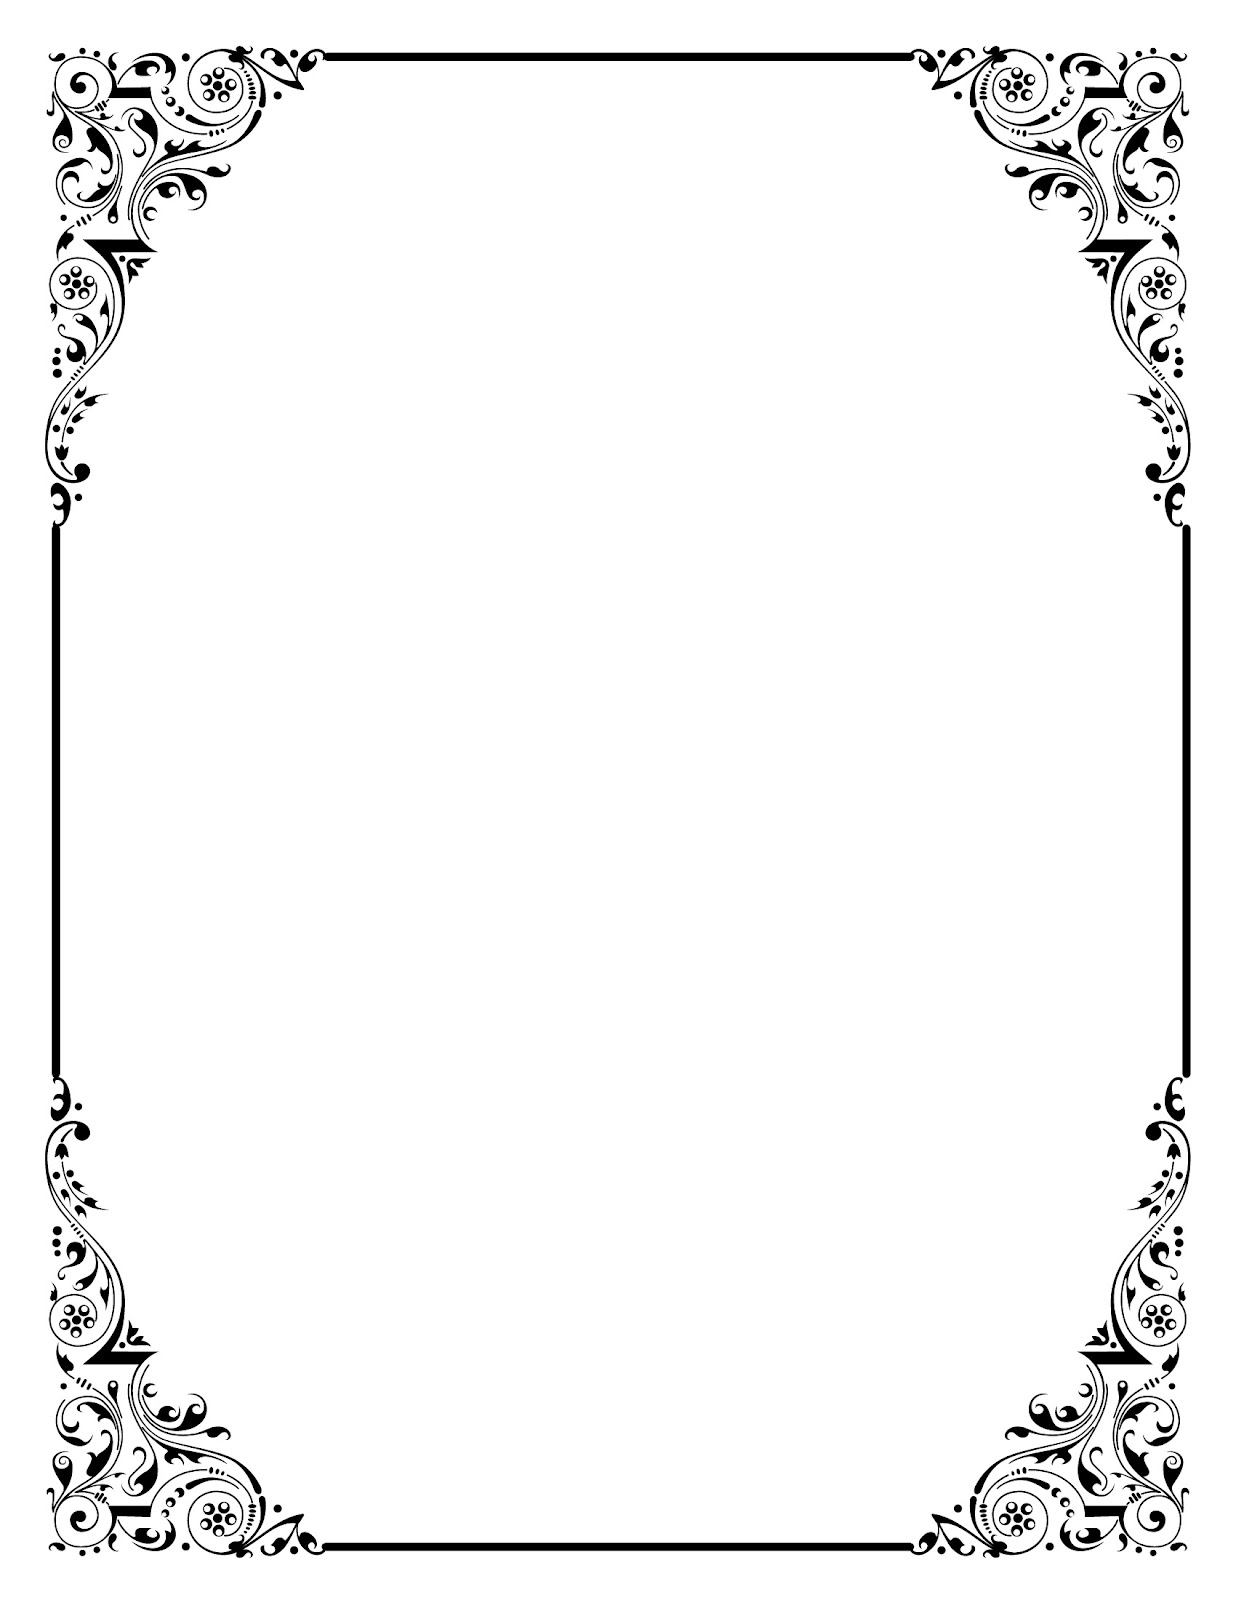 free clipart picture frames - photo #37